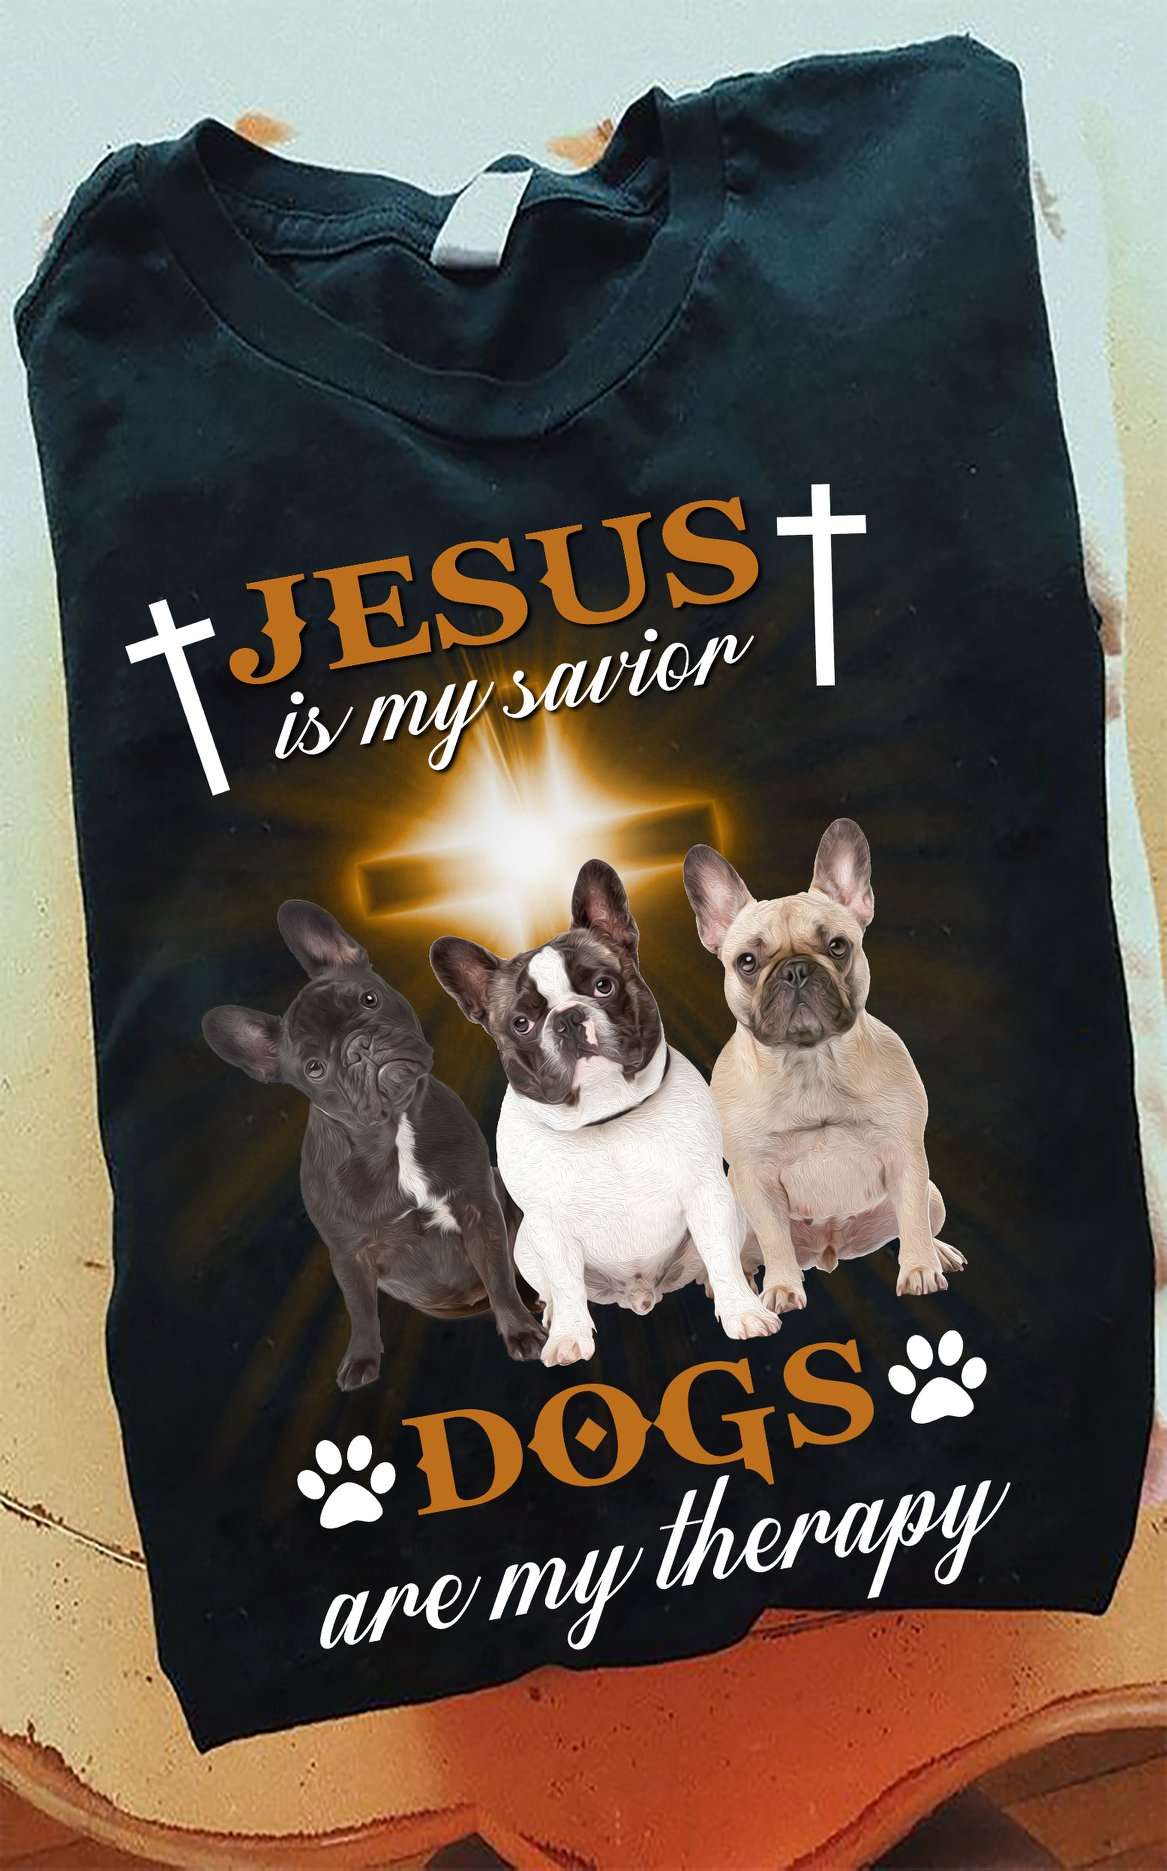 French Bulldog God's Cross - Jesus is my savior dogs are my therapy